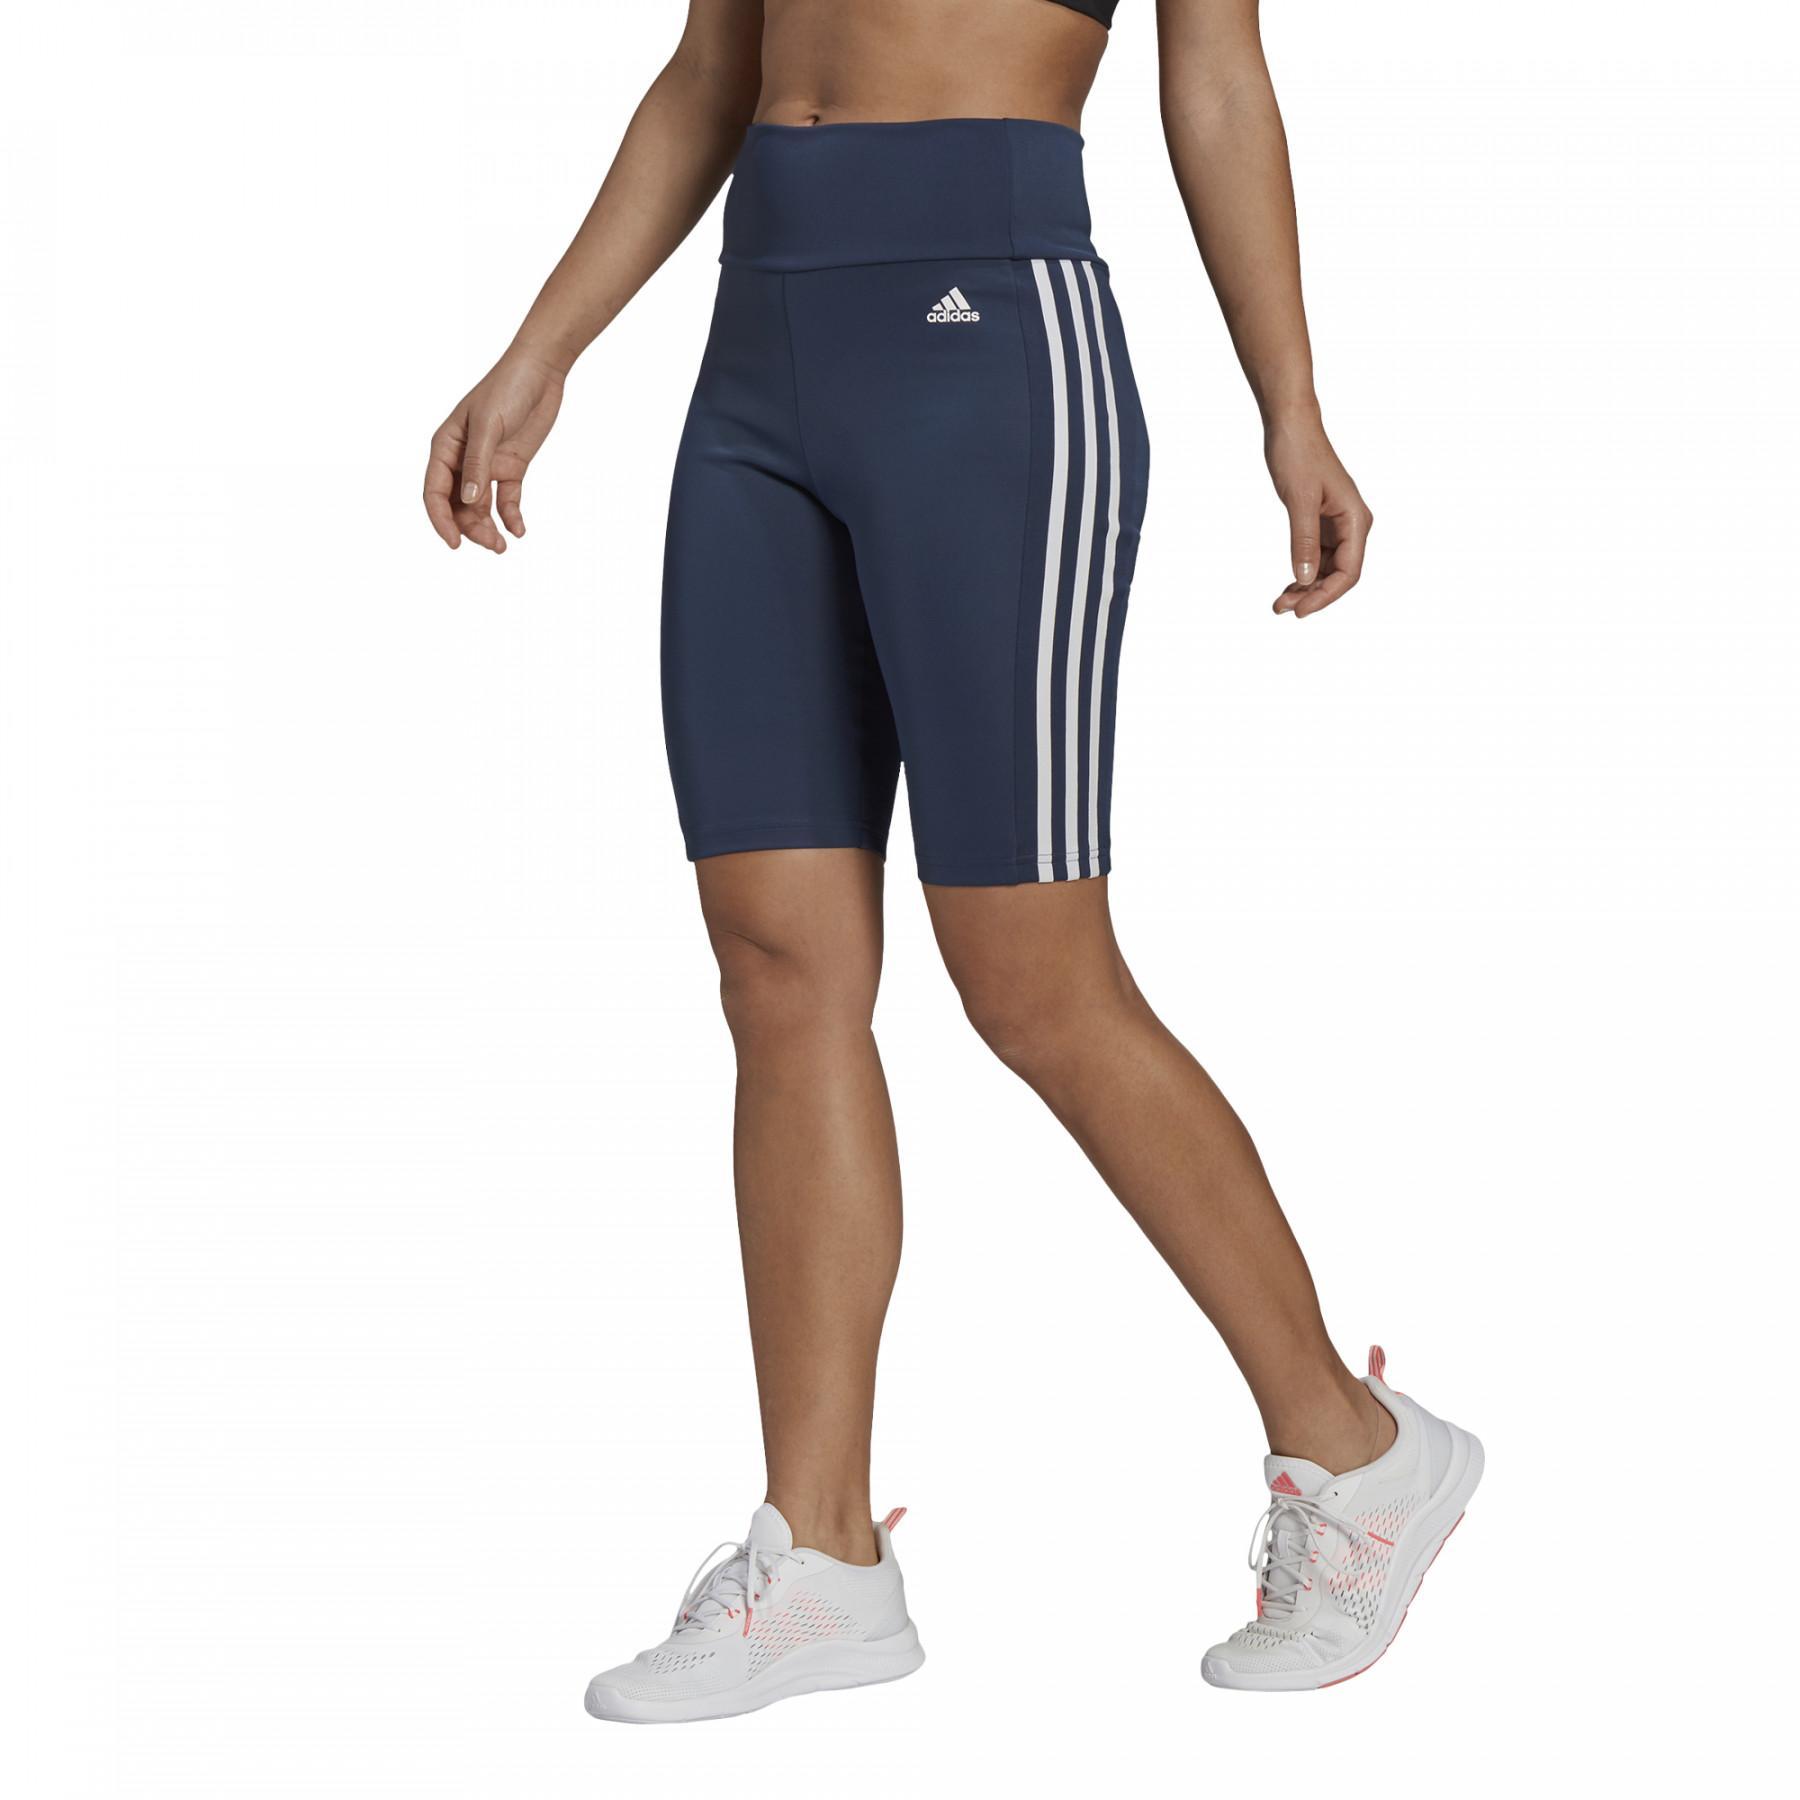 Female cyclist adidas Designed To Move High-Riseport